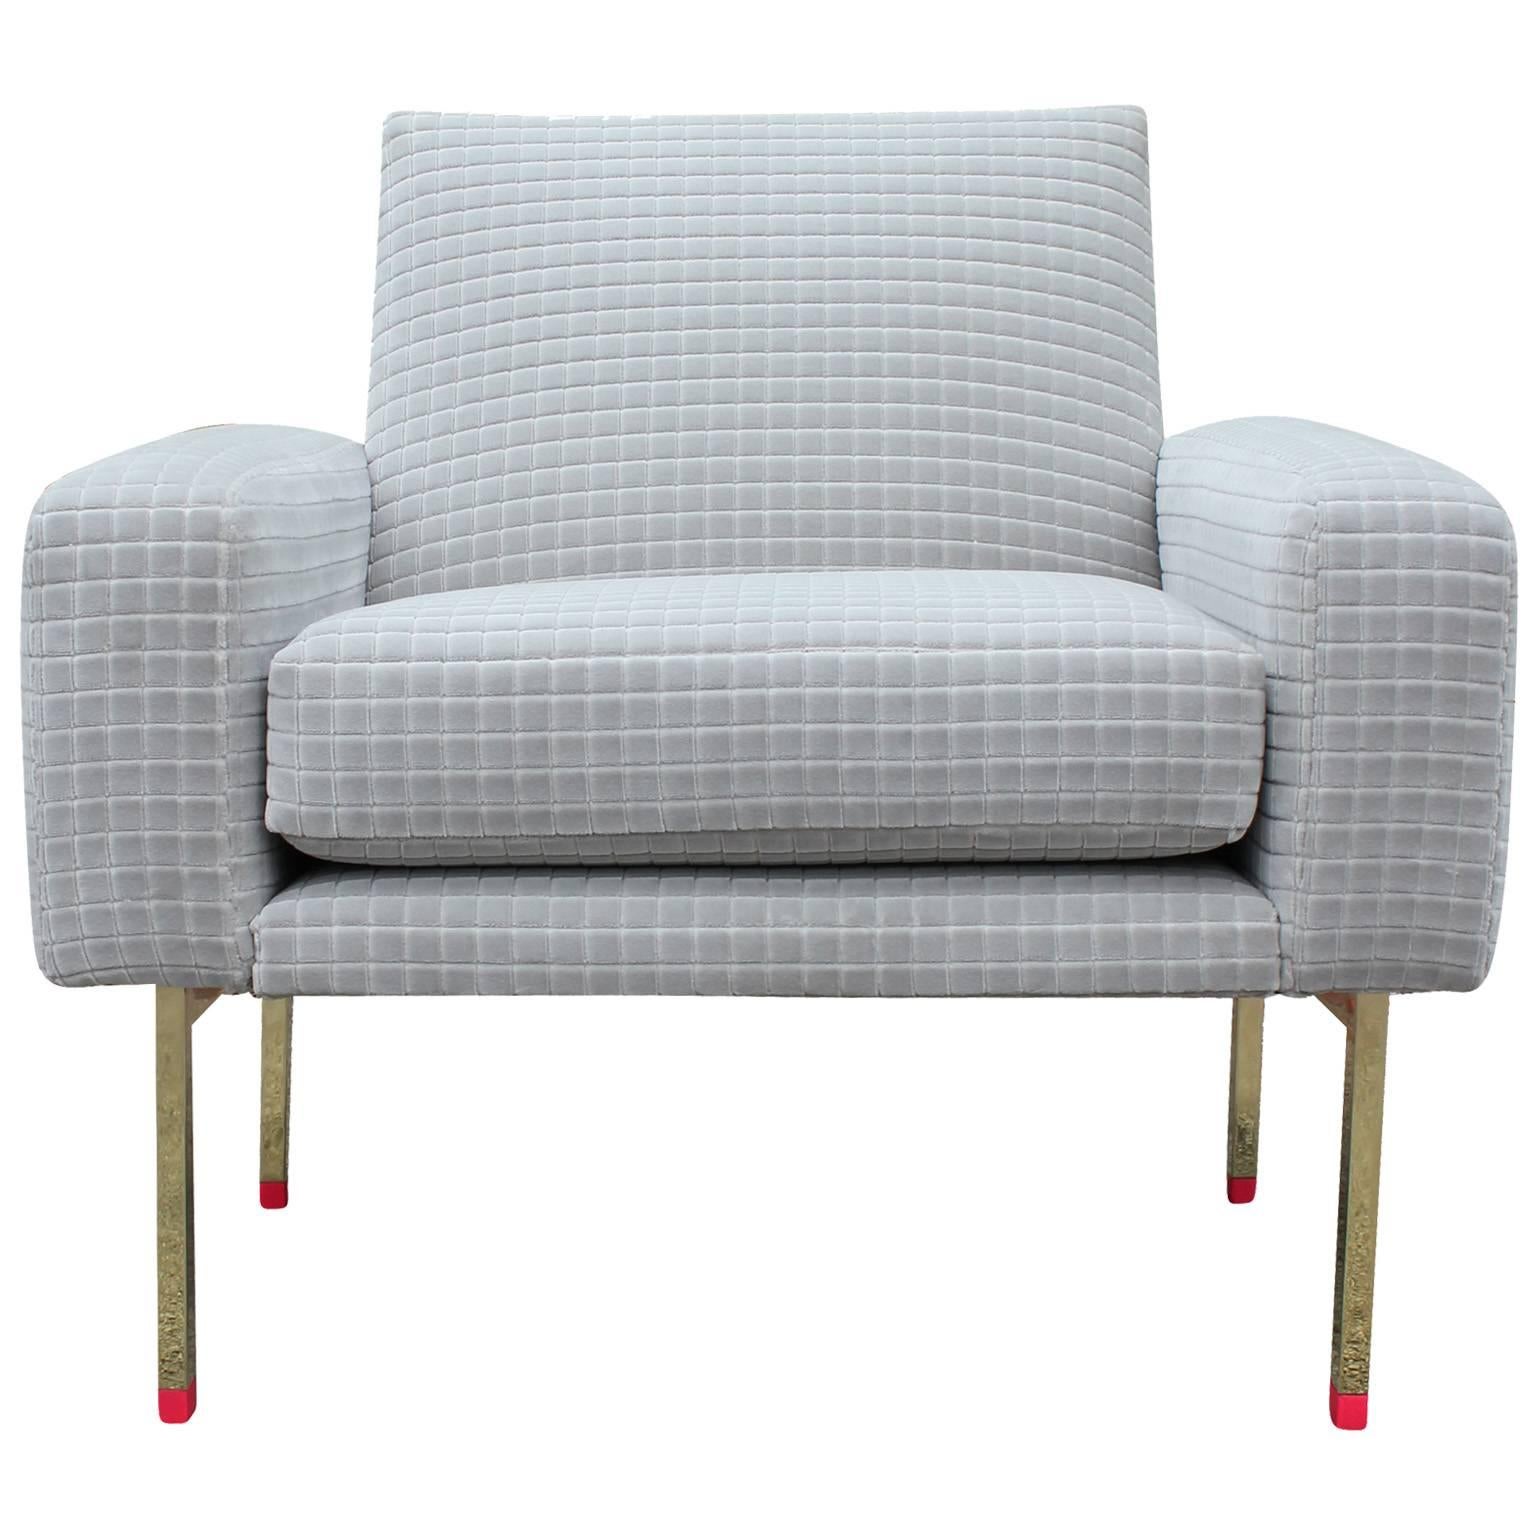 Striking pair of Italian lounge chairs. Chairs are freshly upholstered in a soft grey grid textured velvet. Polished brass legs with hot pink caps make a bold statement. Wonderful pop of color to any space.